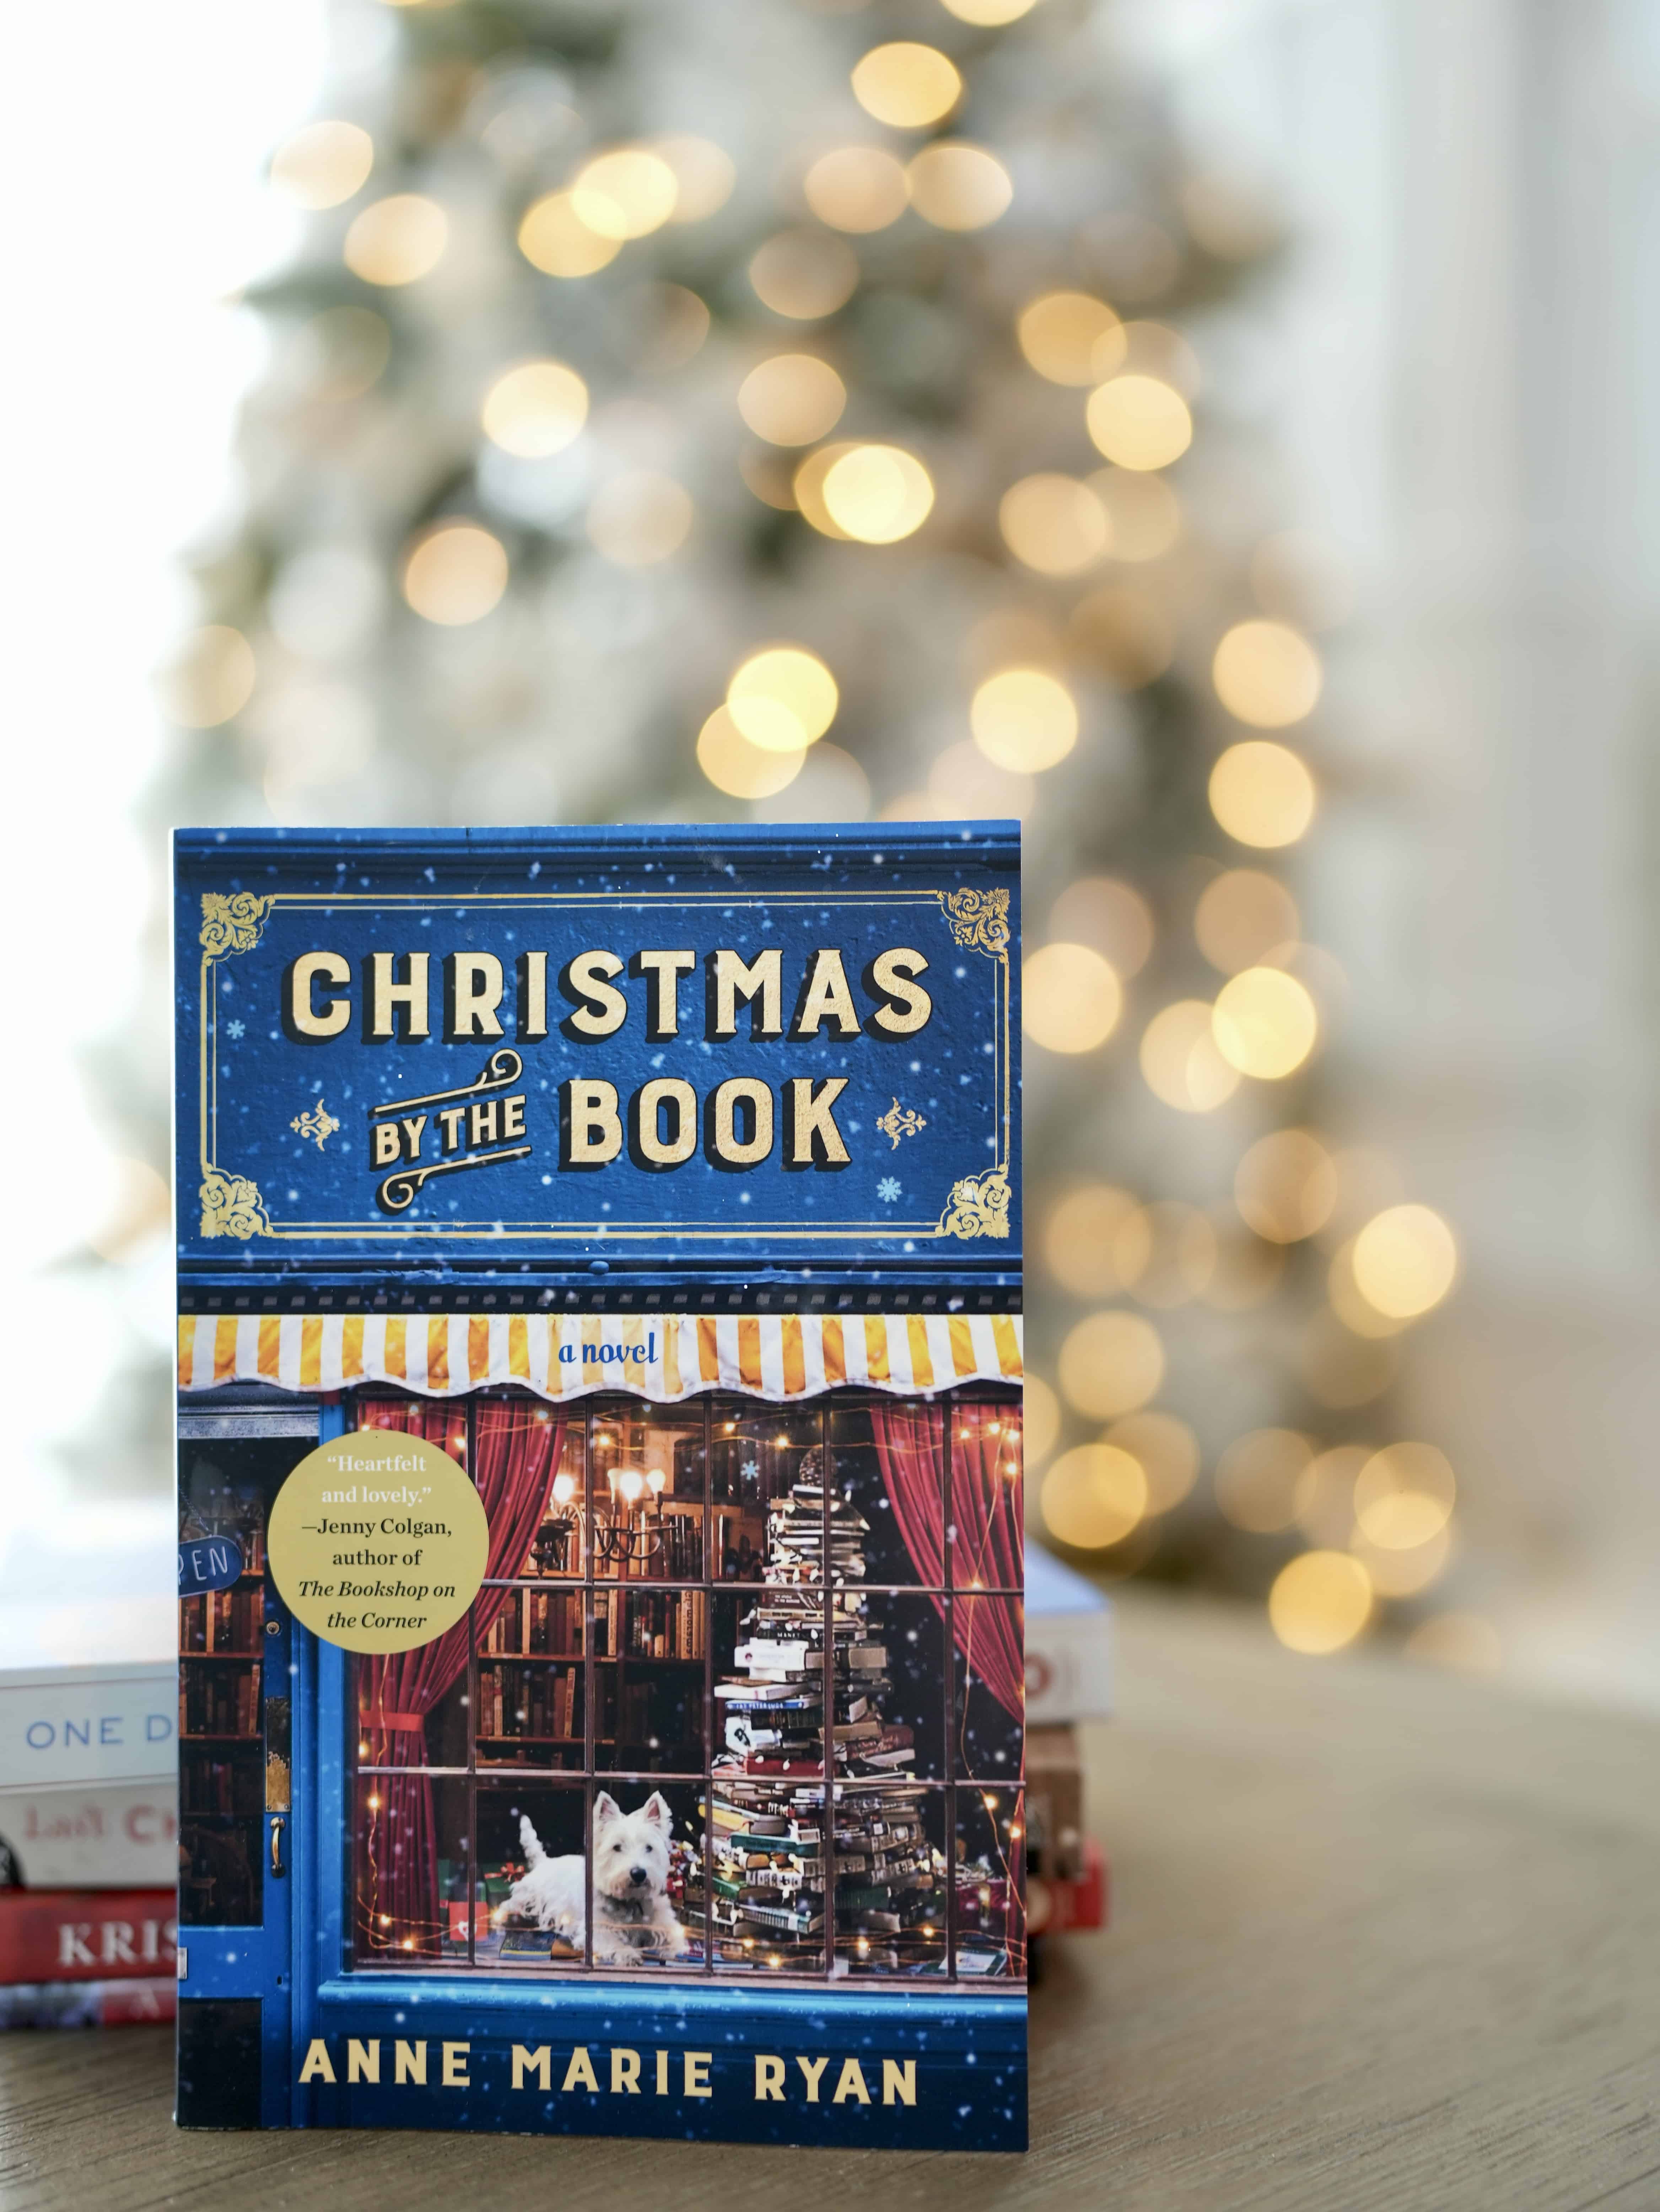 Photo of a book, titled Christmas by the Book, by Anne Marie Ryan. Book is standing upright behind a stack of books, and on top of a brown table. Also sits in front of a lit up Christmas tree.